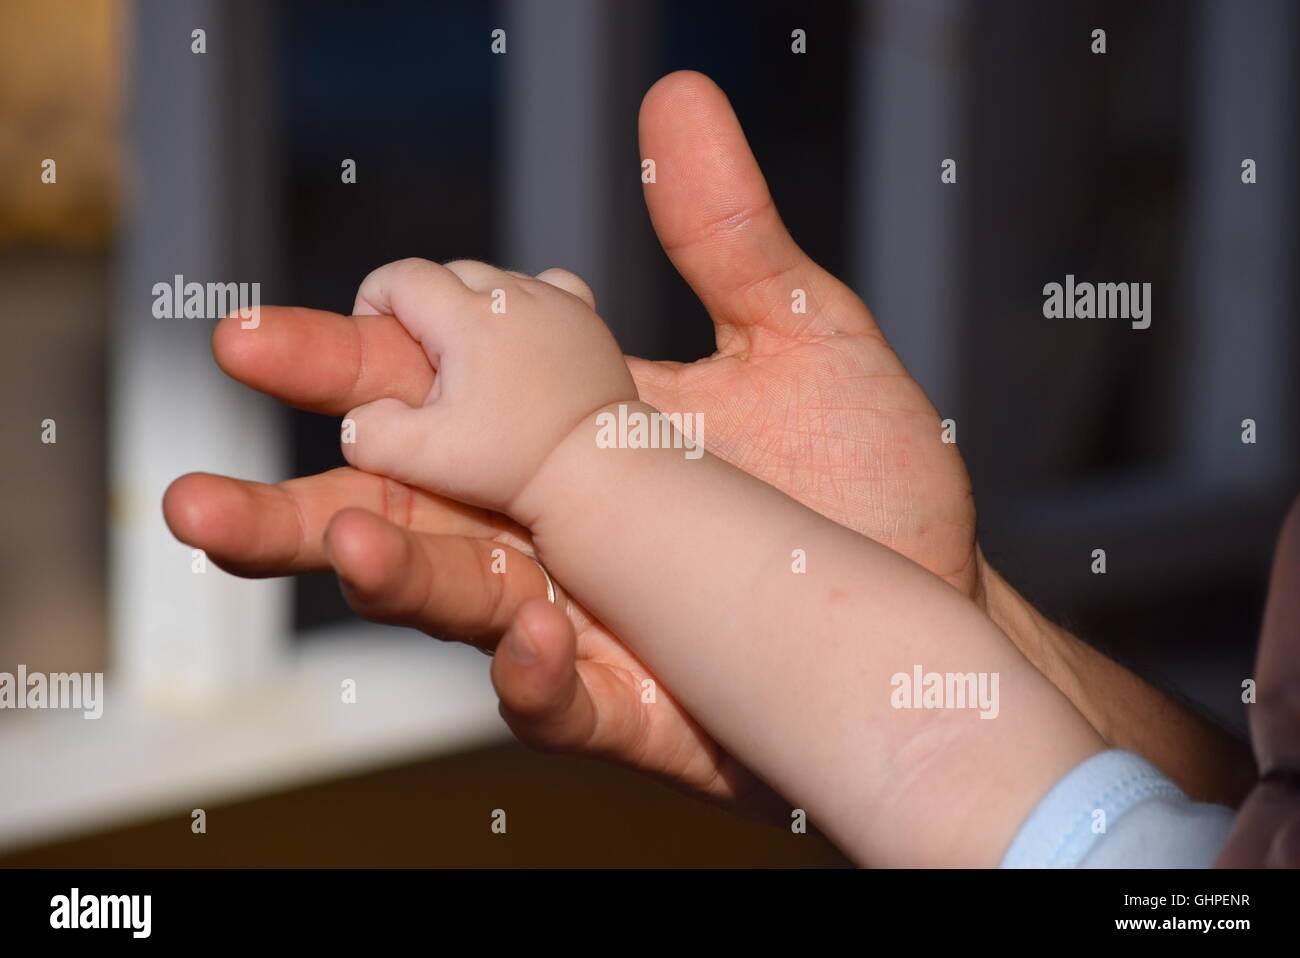 Baby holding hands with his father Stock Photo